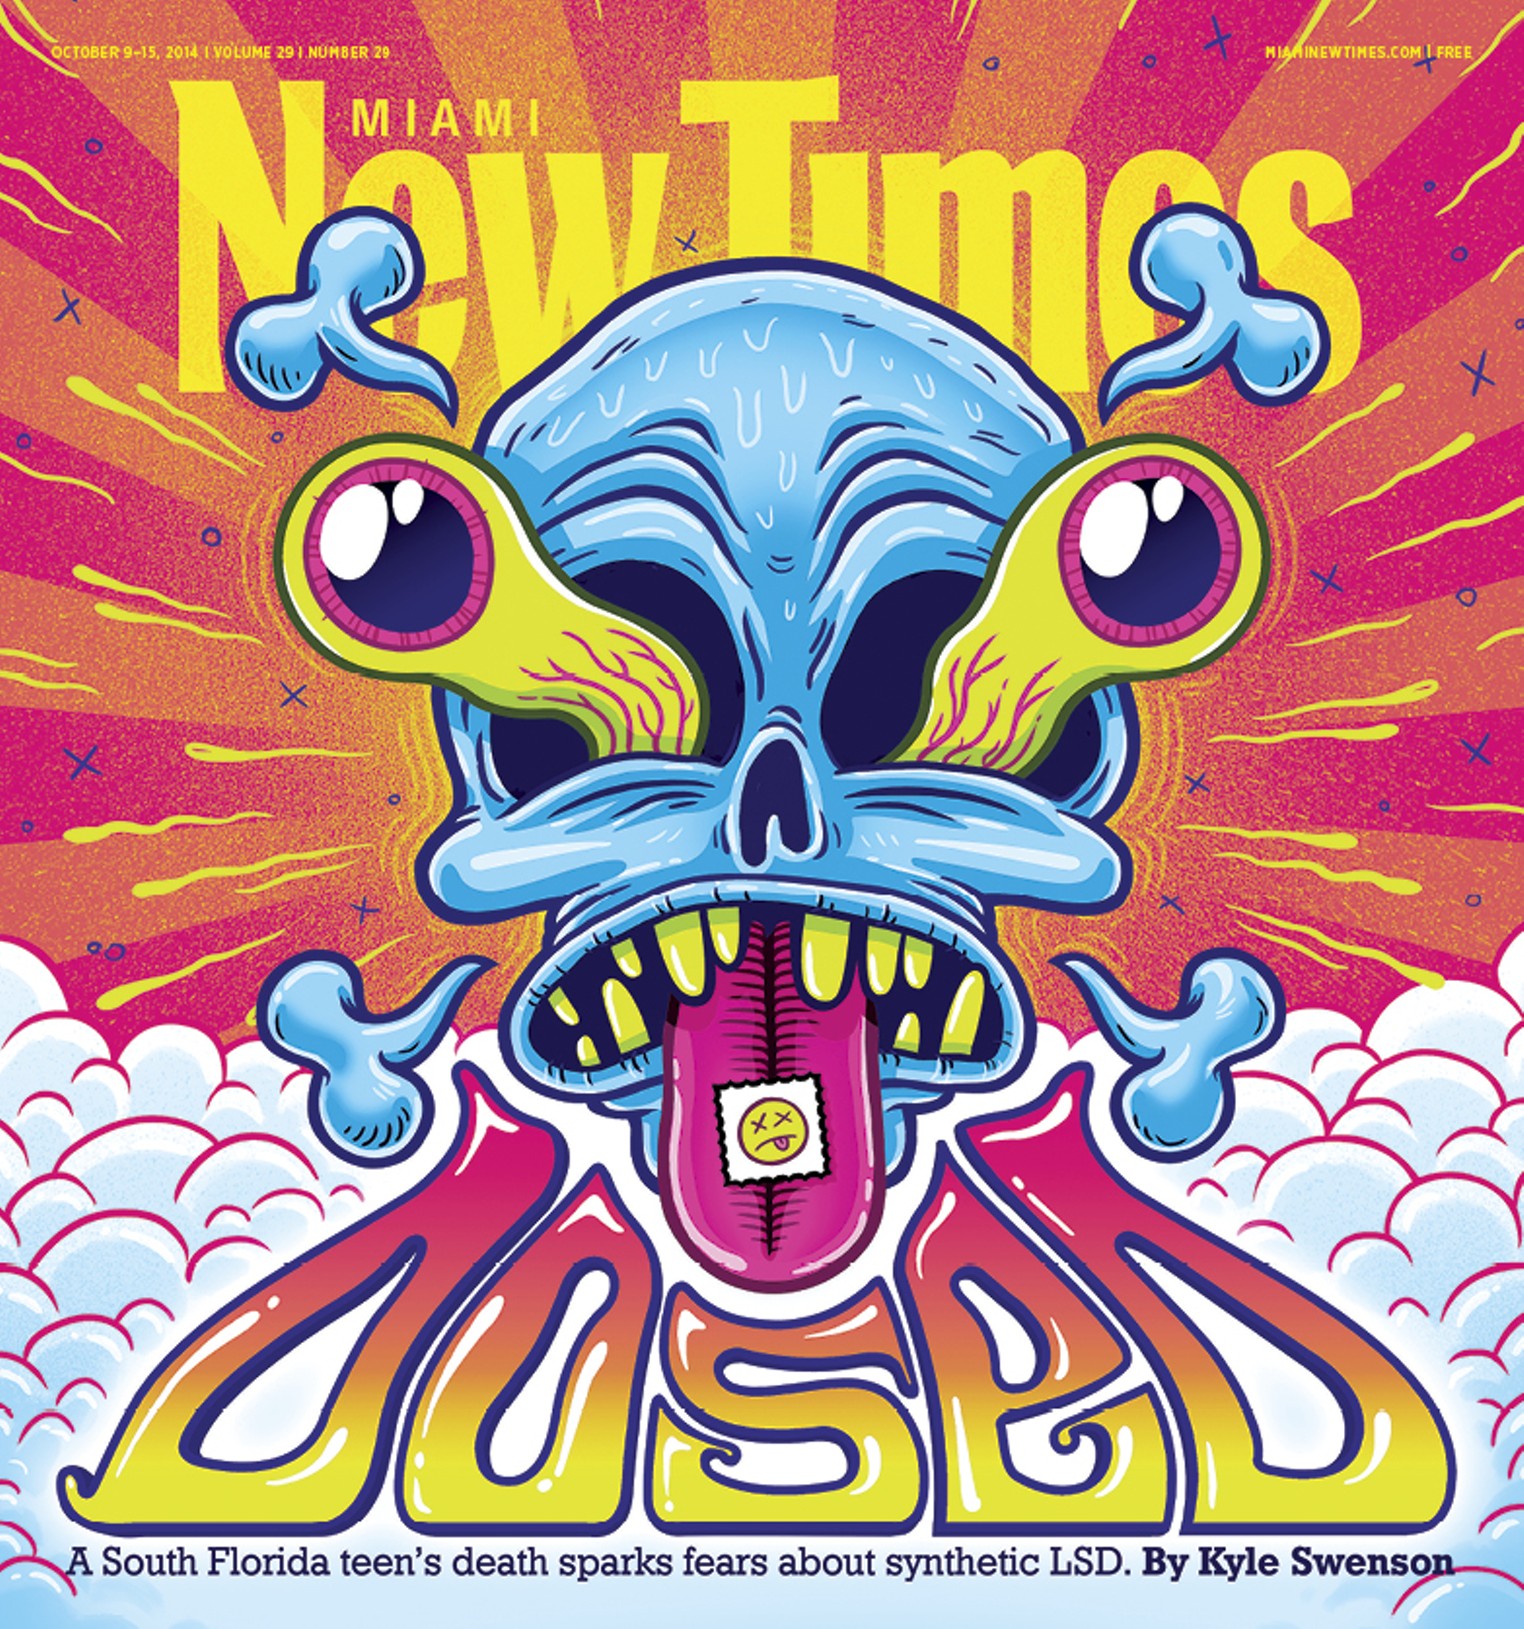 The Best Miami New Times Covers of 2014 | Miami | Miami New Times | The ...